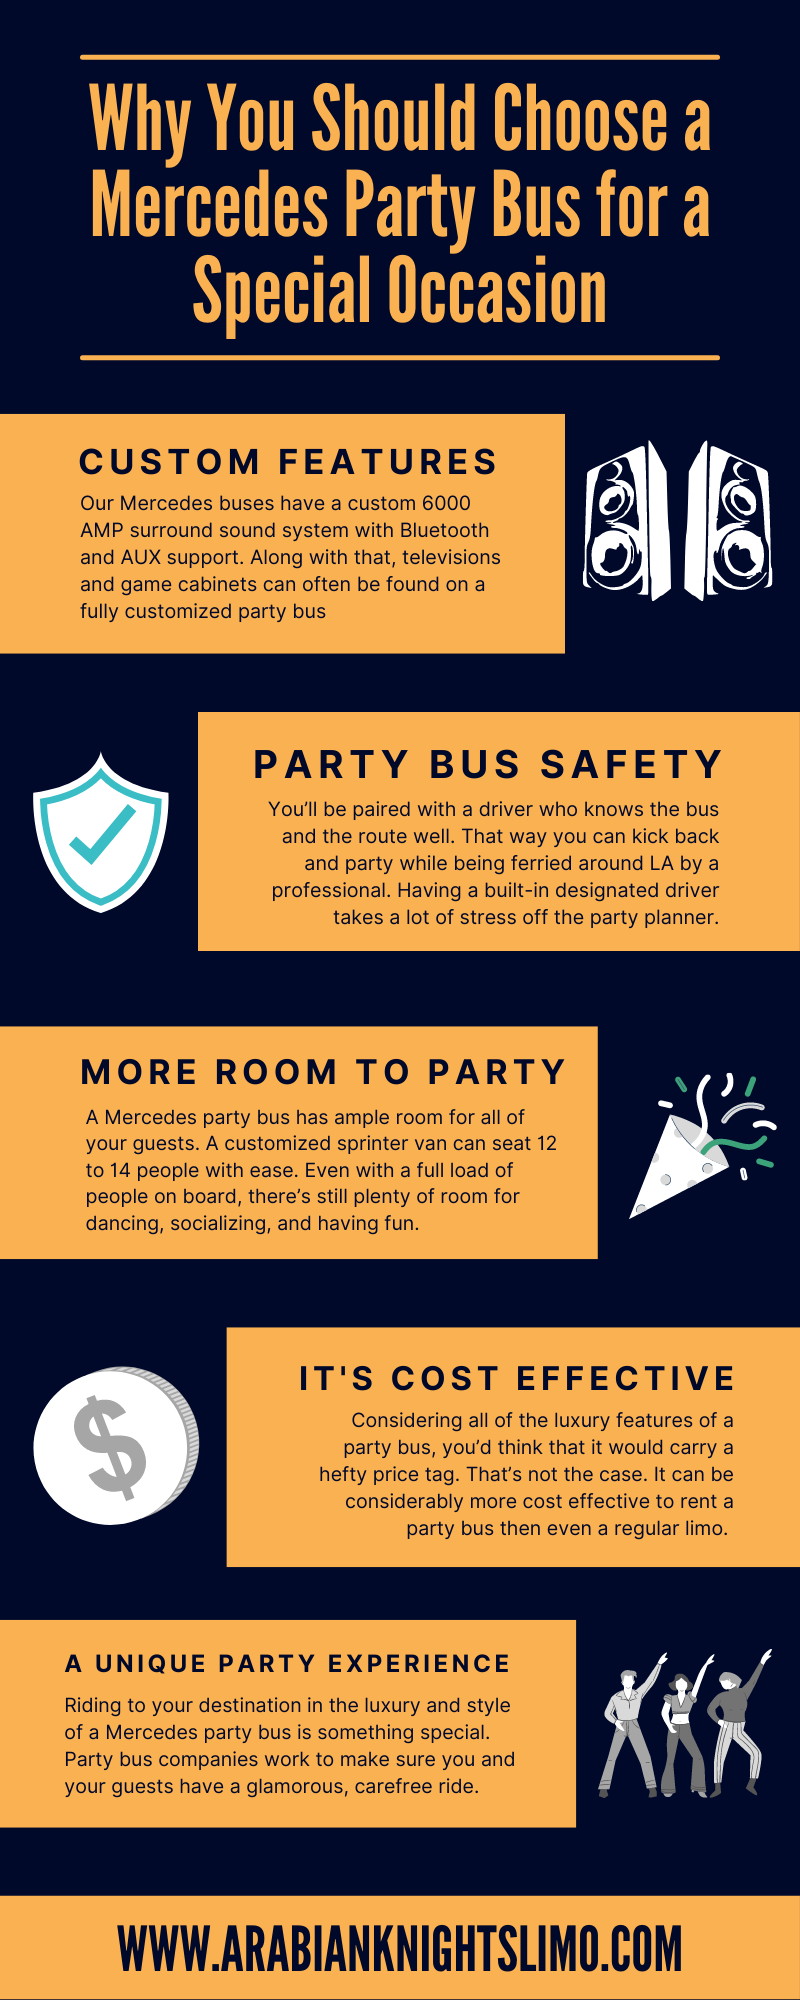 Infographic - Why You Should Choose a Mercedes Party Bus for a Special Occasion